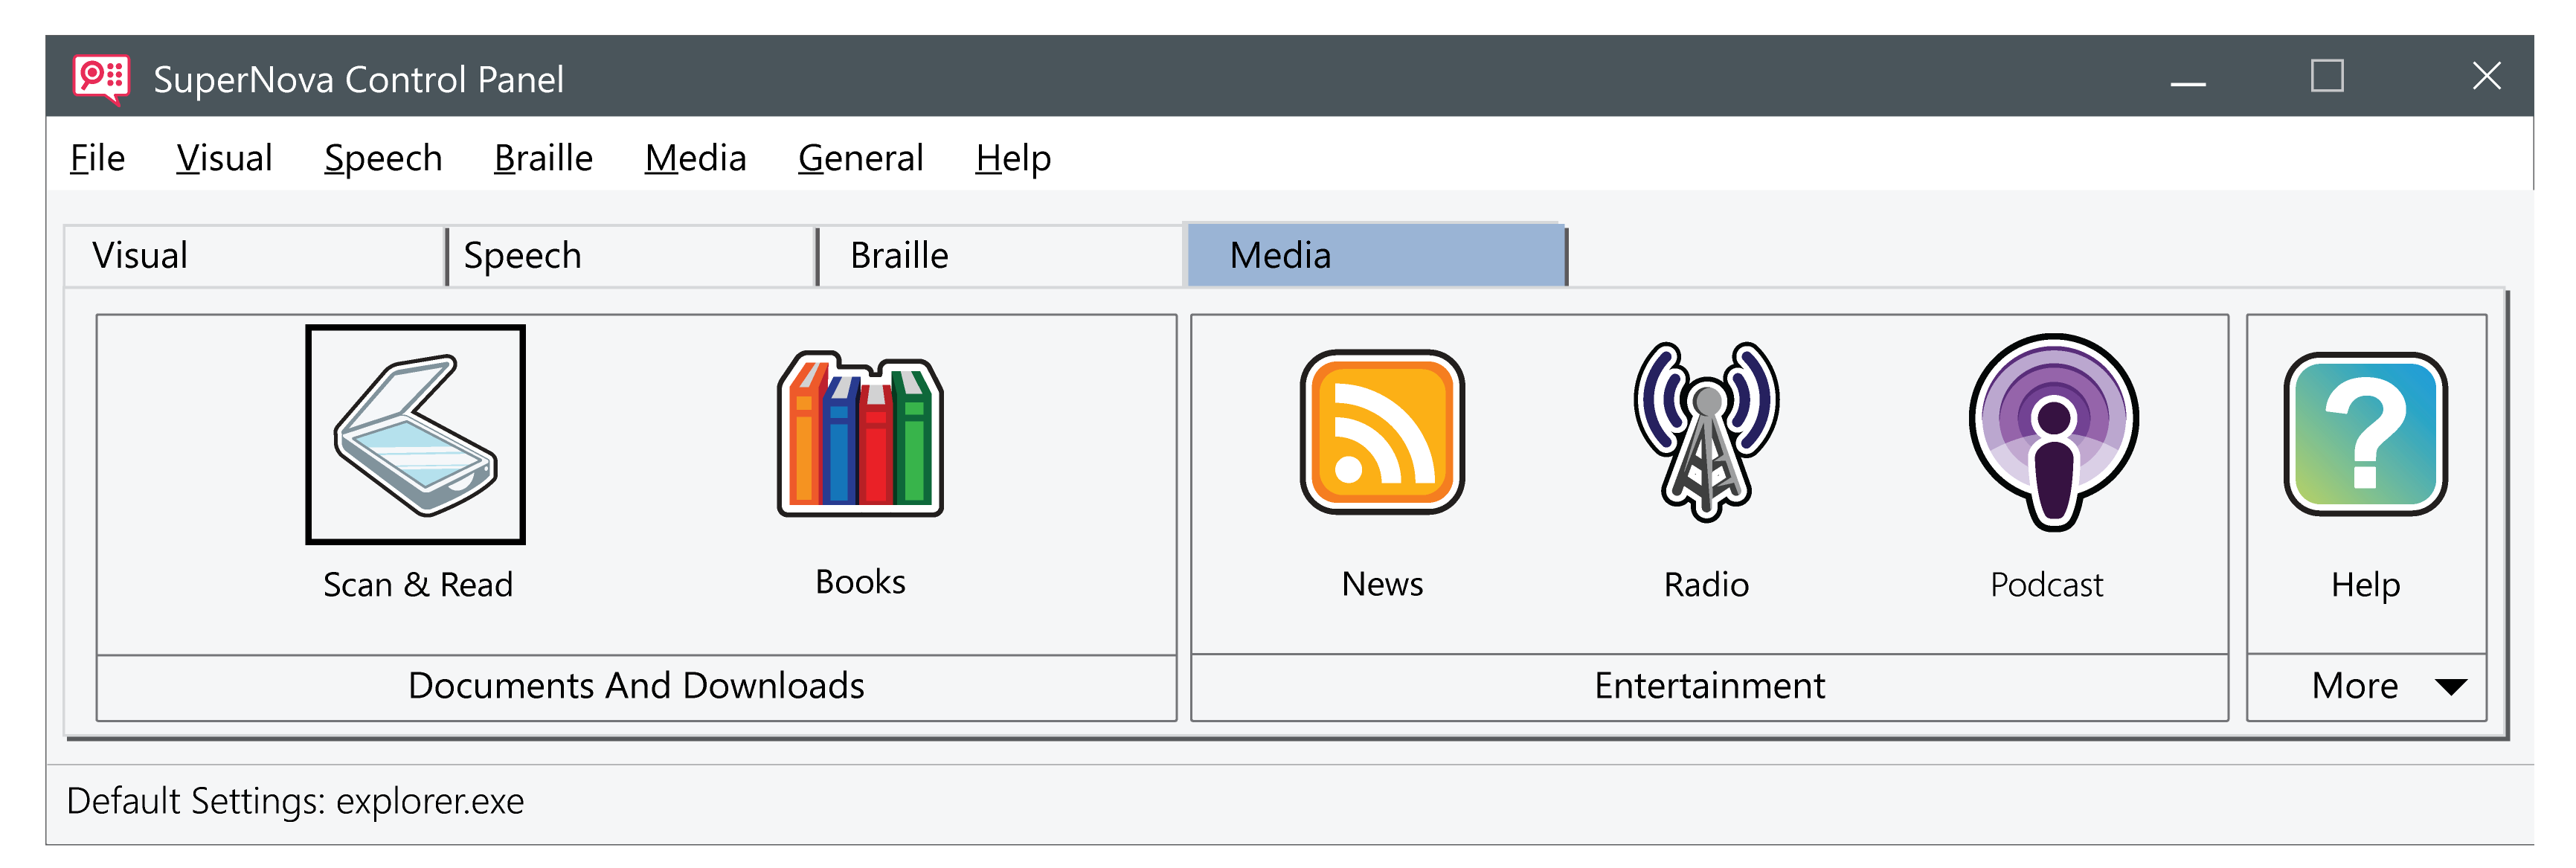 the new Media tab in the new SUpernova 16 control panel